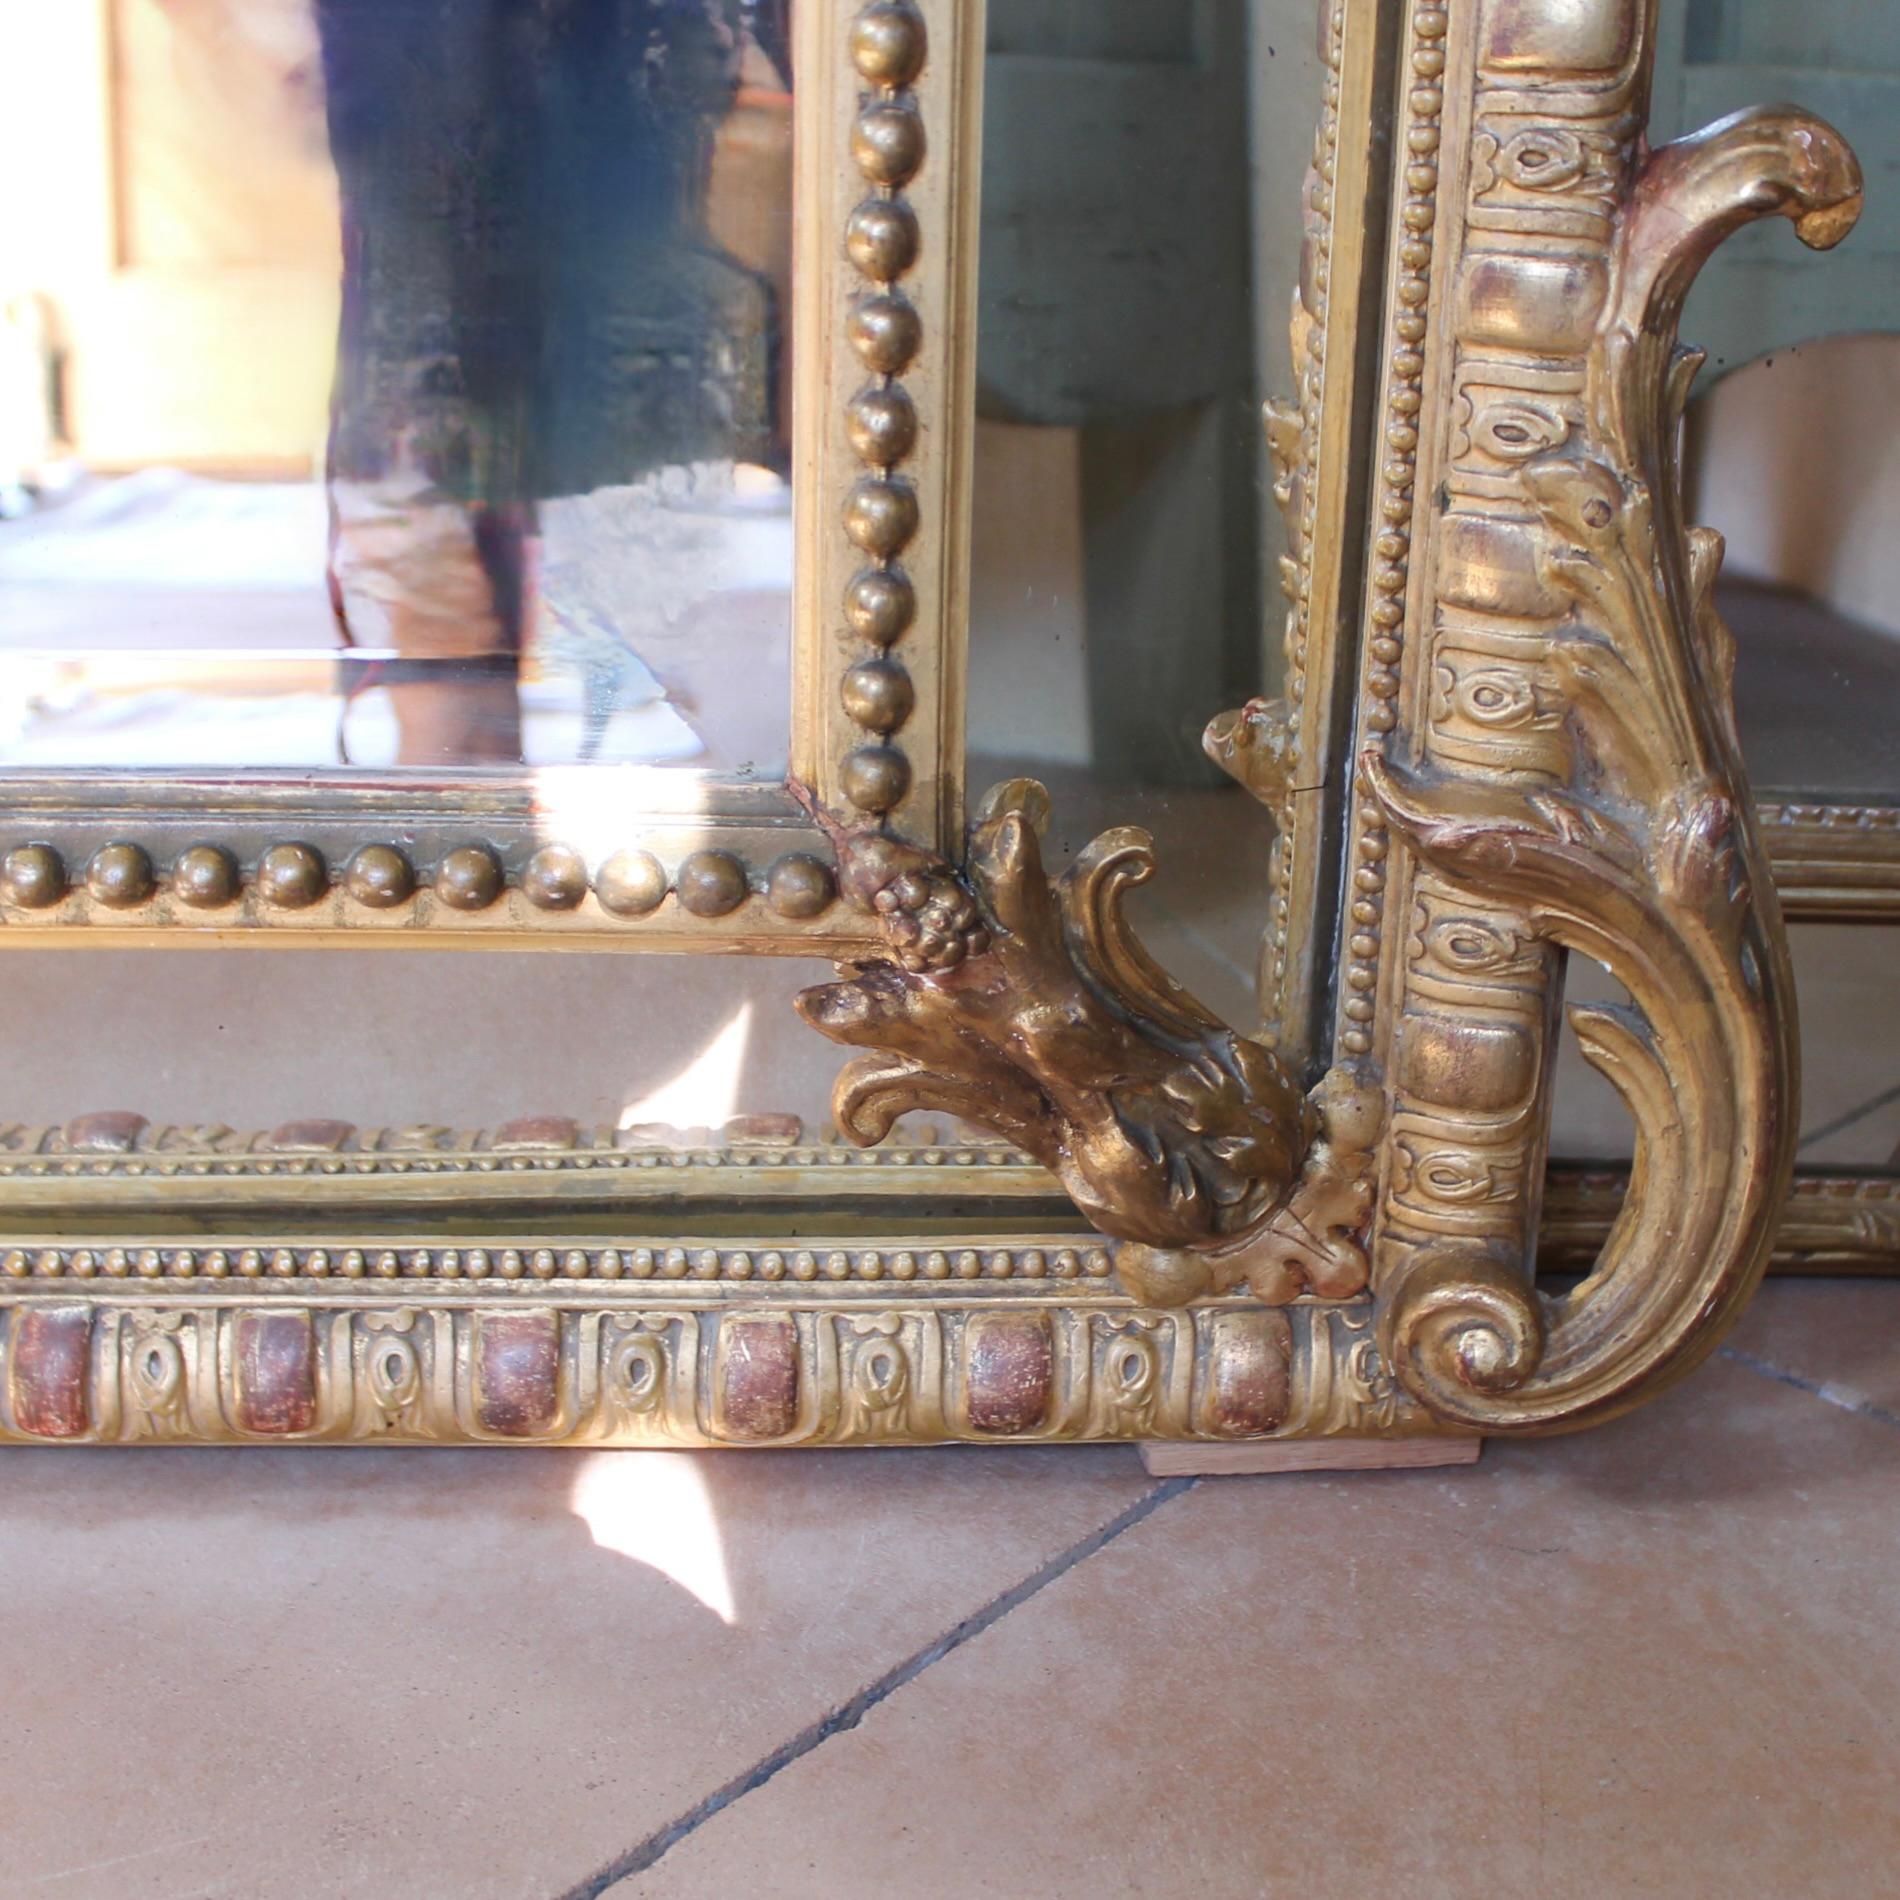 Large French Gilt Borderglass Pier Mirror with Rococo Crest, 19th Century For Sale 6